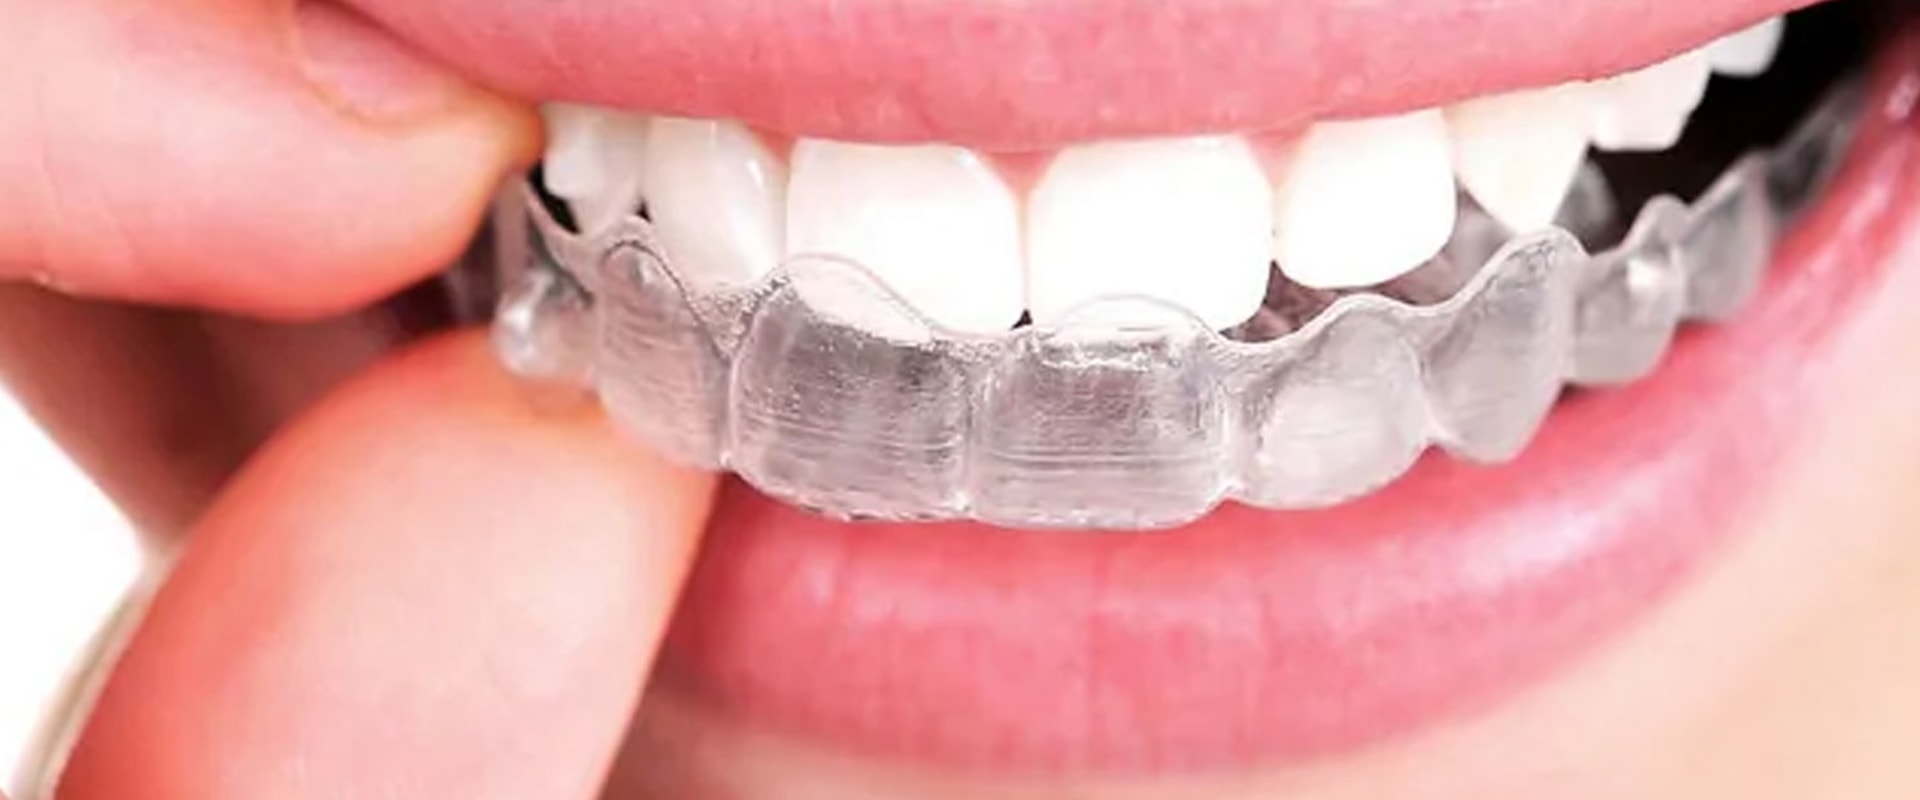 What does invisalign cost?